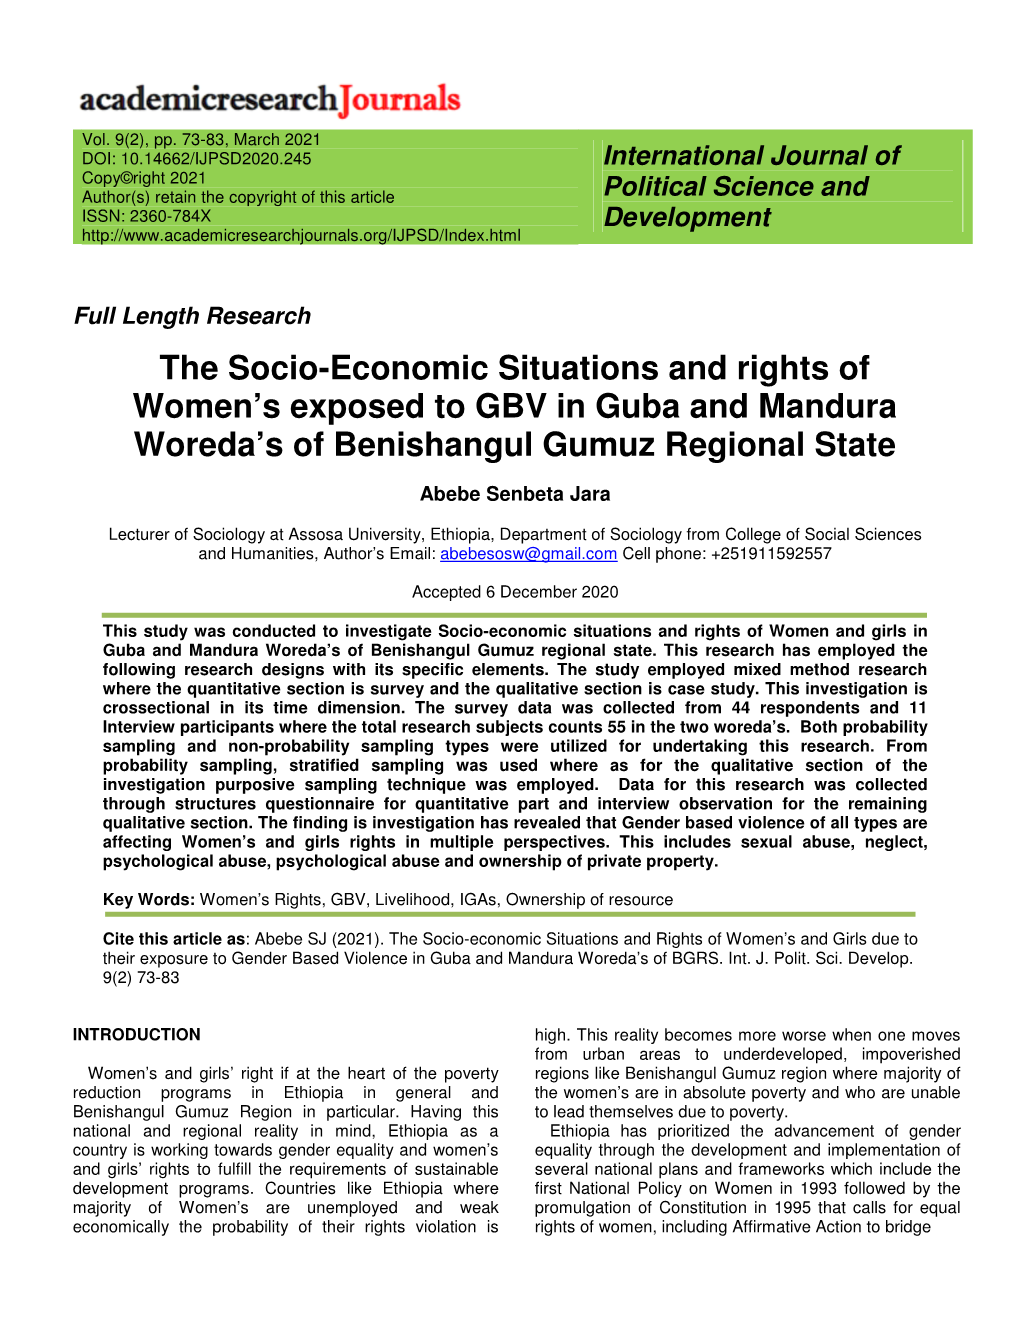 The Socio-Economic Situations and Rights of Women's Exposed to GBV